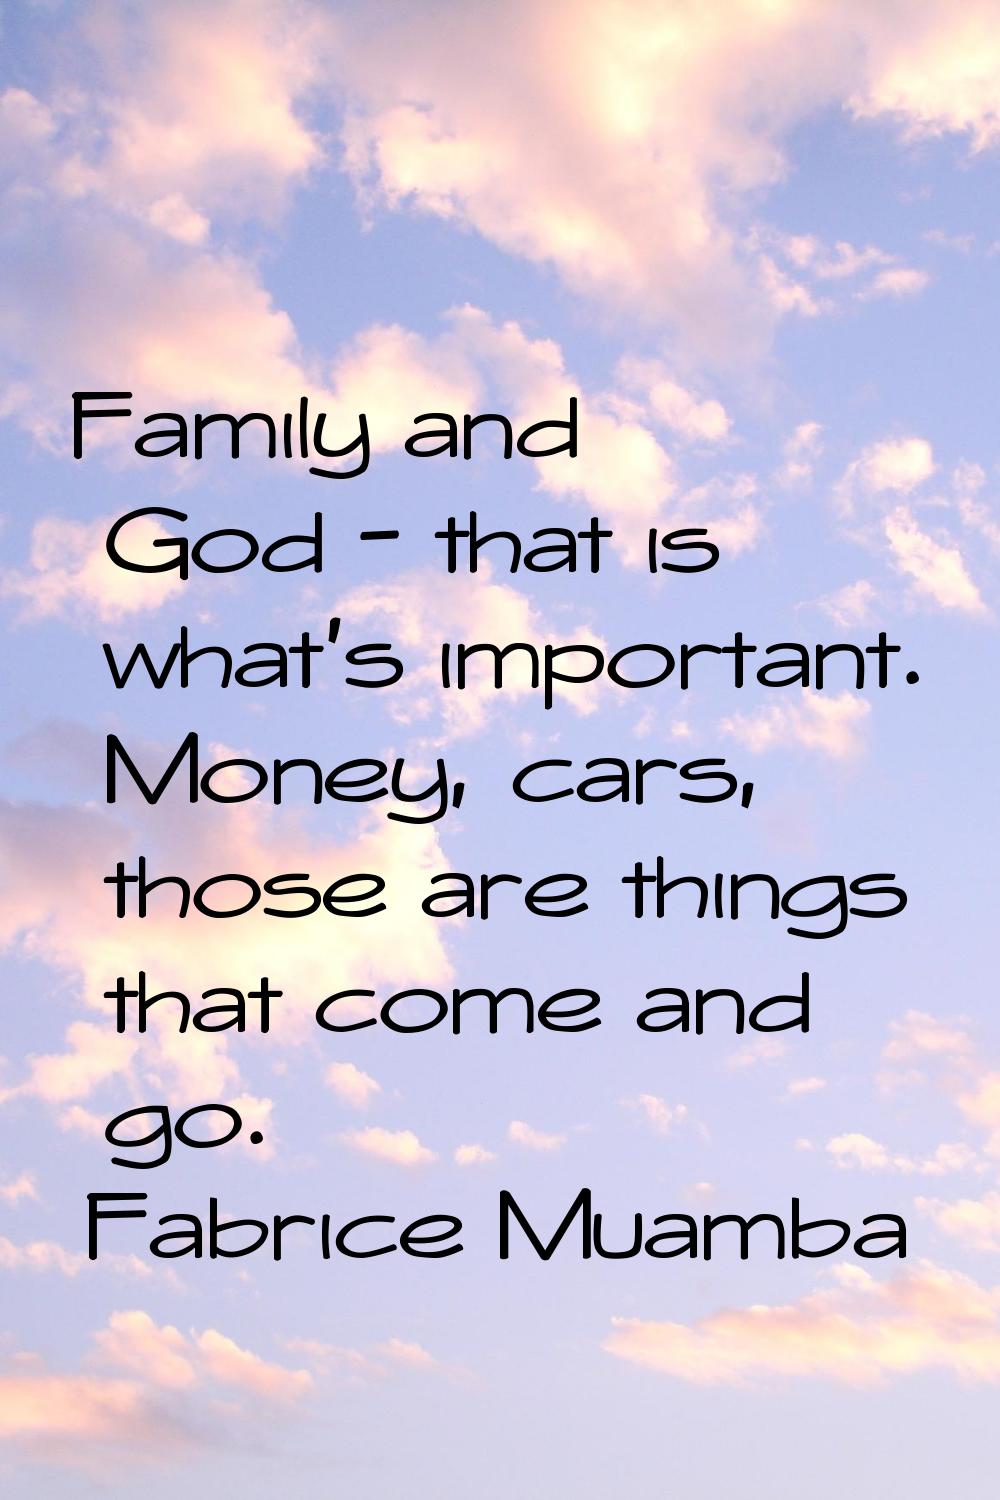 Family and God - that is what's important. Money, cars, those are things that come and go.